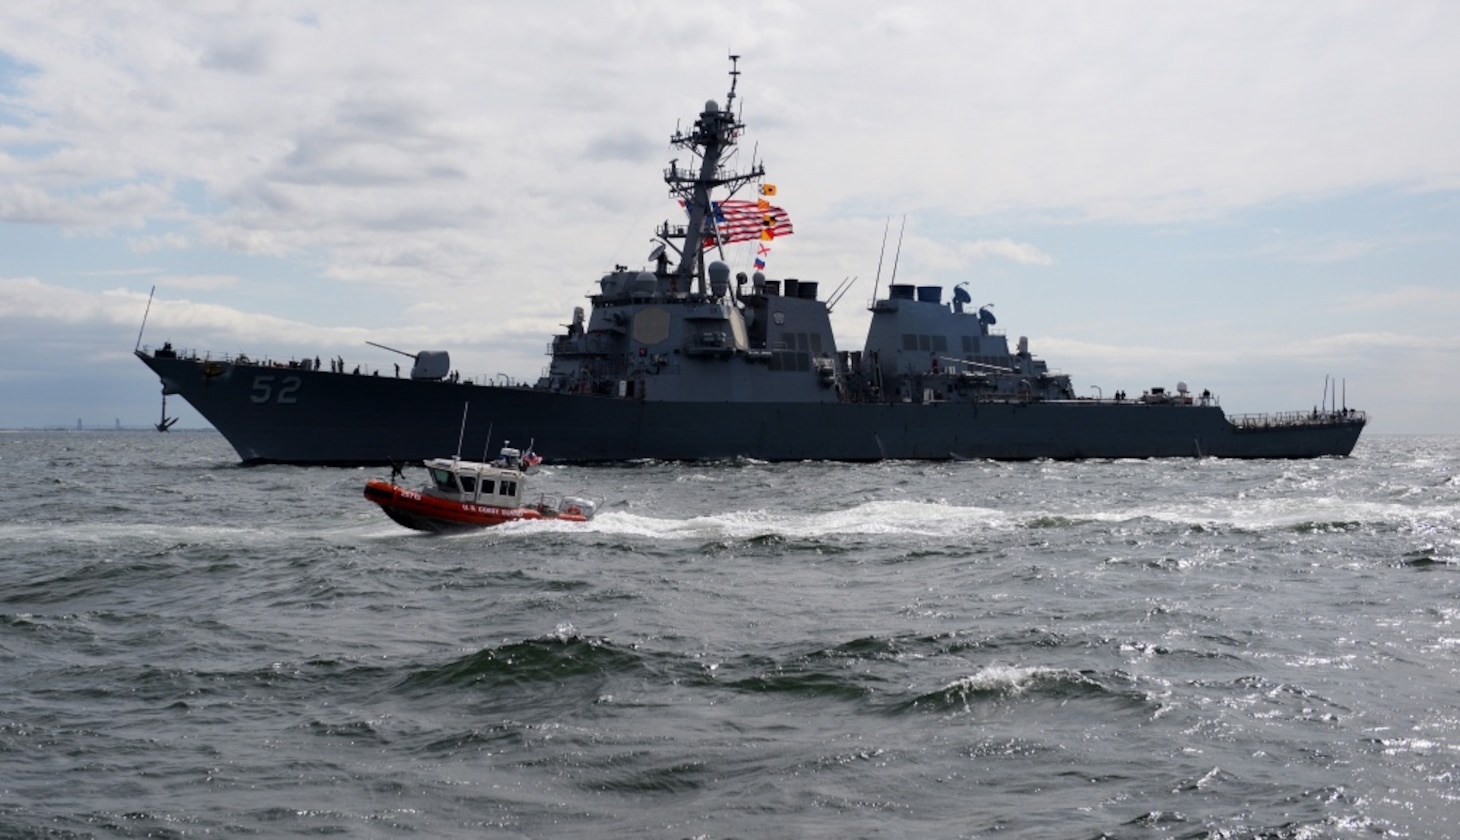 File photo: EW YORK (May 20, 2015) - USS Barry (DDG 52) and a U.S. Coast Guard rigid-hulled inflatable boat sail in the Parade of Ships in the Hudson River May 20. The event officially begins Fleet Week New York and provides the public with a passing review of the week's visiting ships. Fleet Week New York, now in its 27th year, is the city's time-honored celebration of the sea services. It is an unparalleled opportunity for the citizens of New York and the surrounding tri-state area to meet Sailors, Marines, and Coast Guardsmen, as well as witness firsthand the latest capabilities of todays maritime services. 